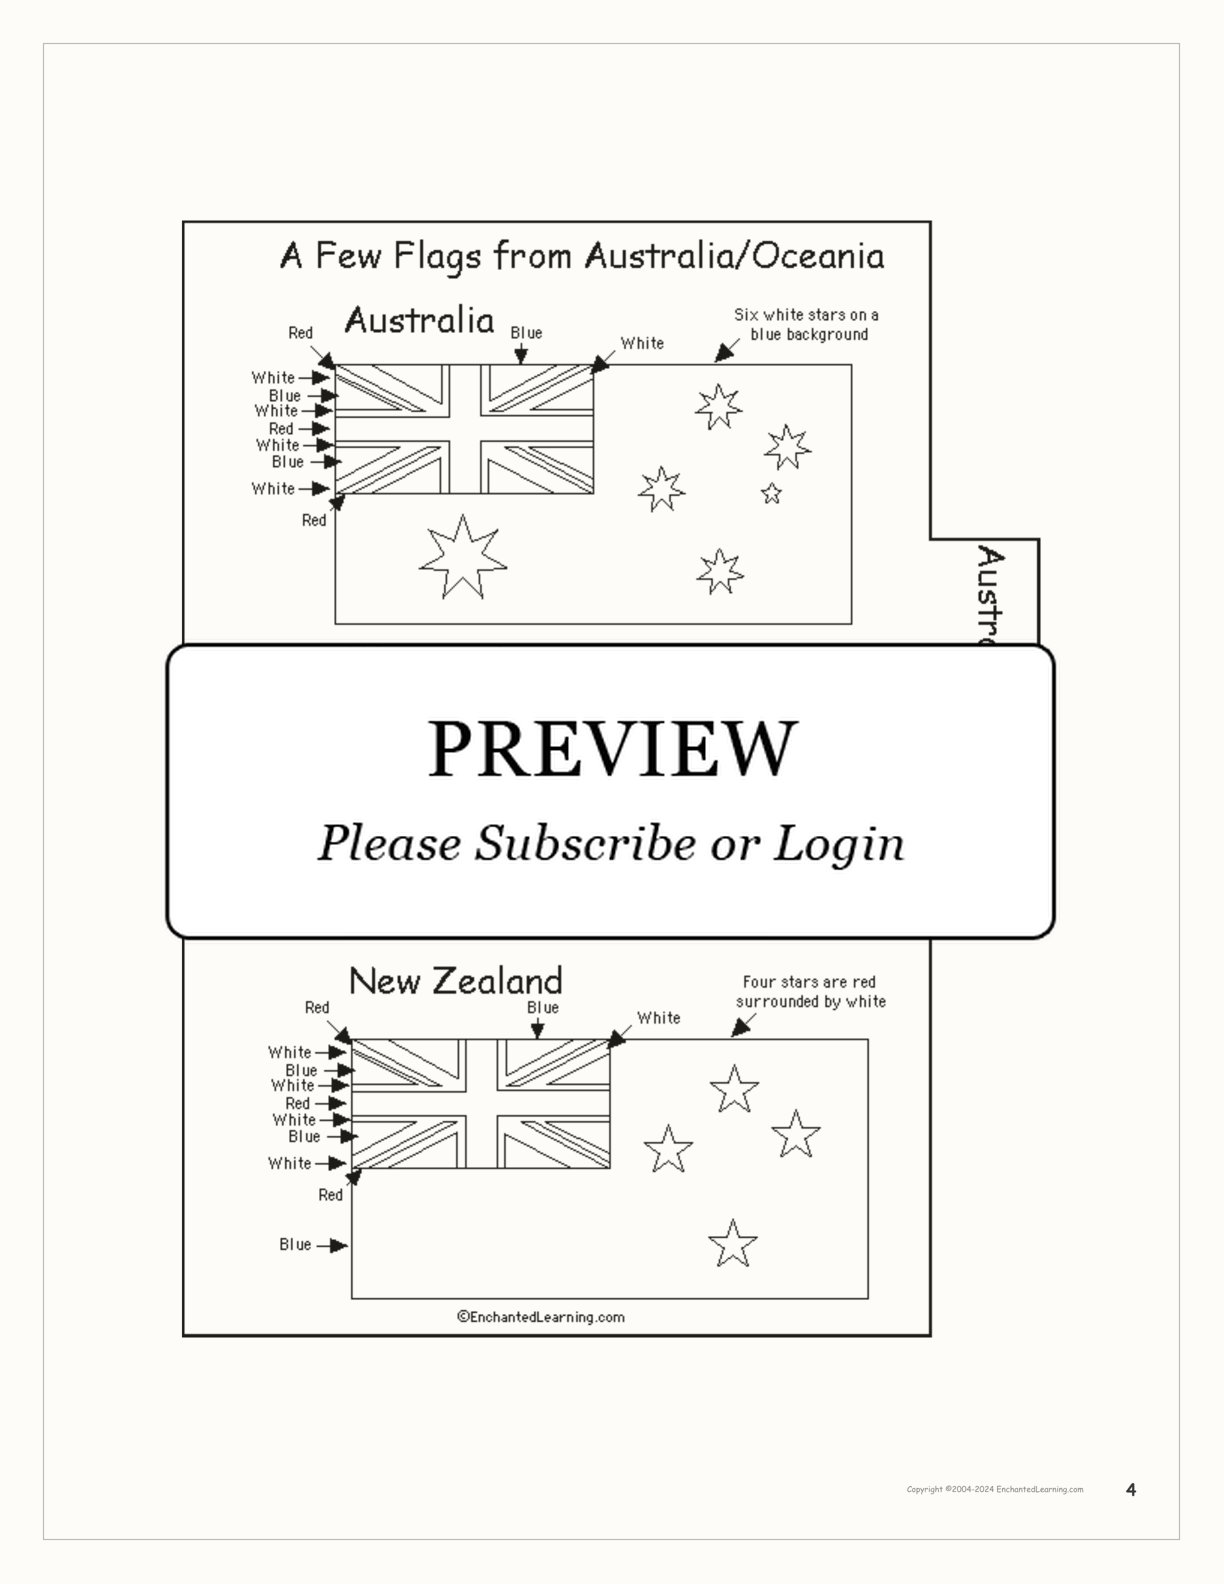 World Flags Book interactive printout page 4